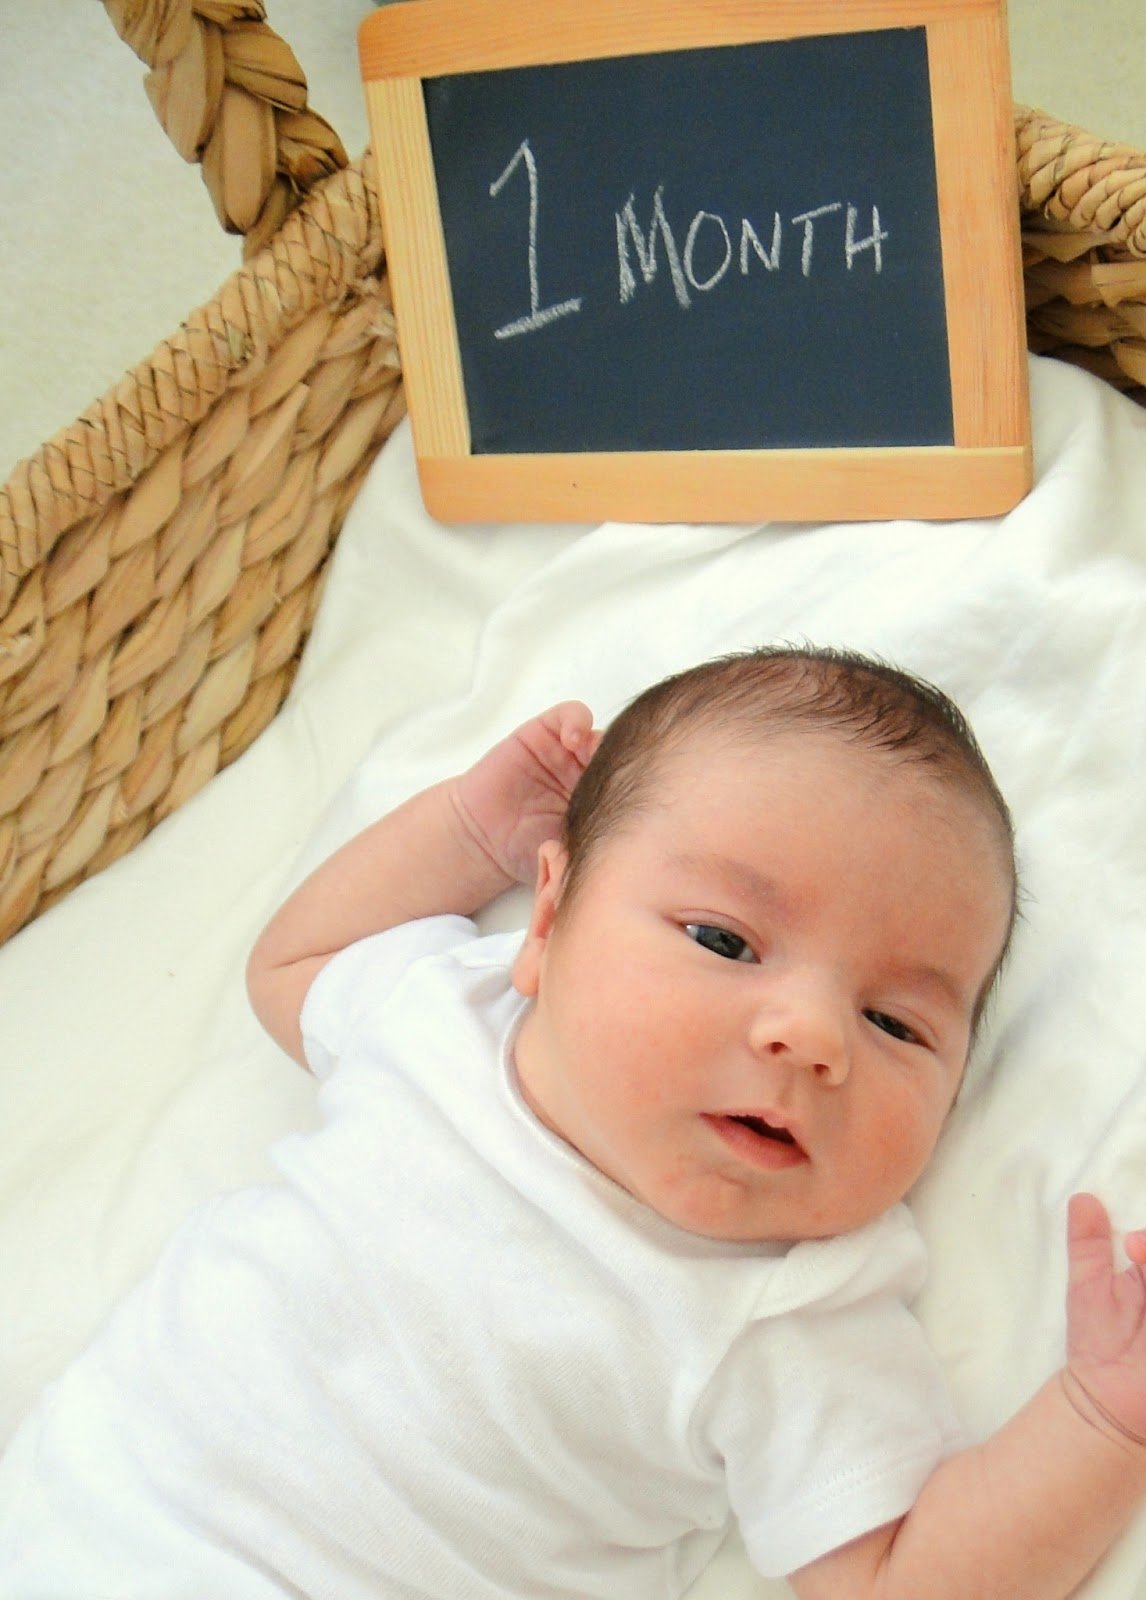 10 Great One Month Old Baby Picture Ideas party frosting july 4th ideas and inspiration 2022